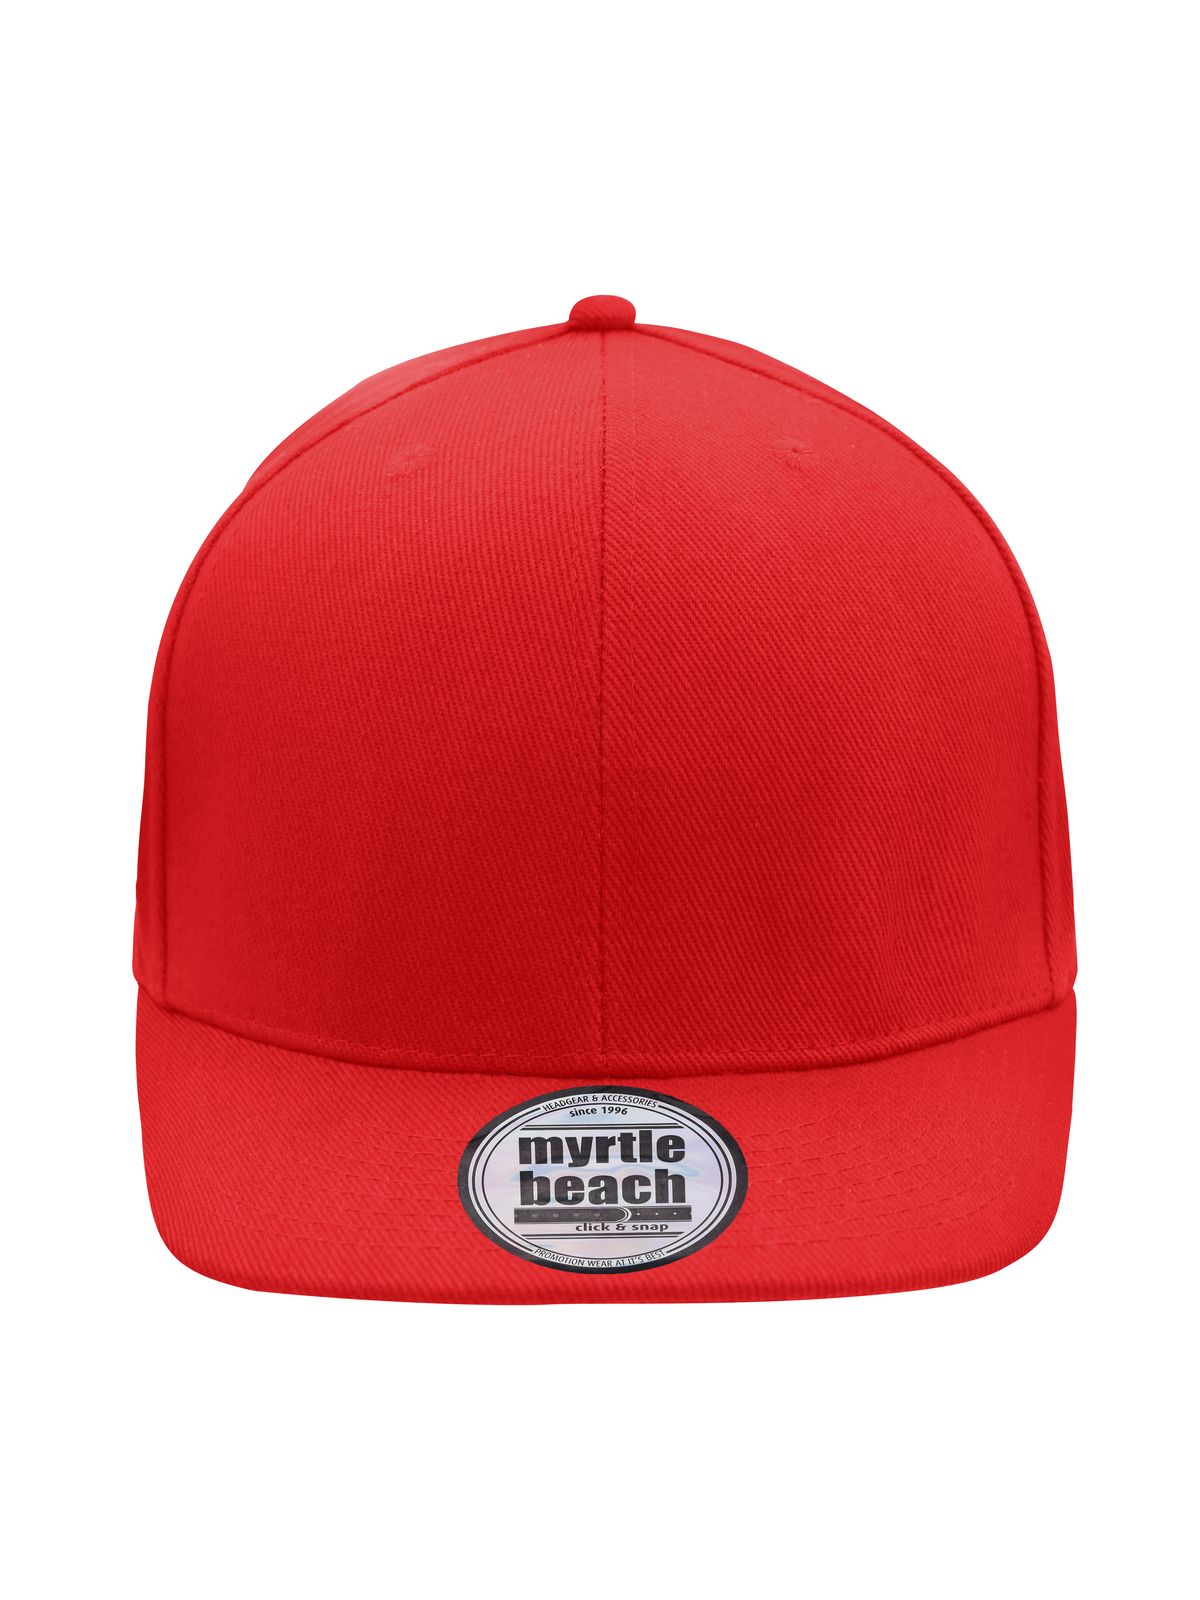 6-panel-pro-cap-style-red-red.webp